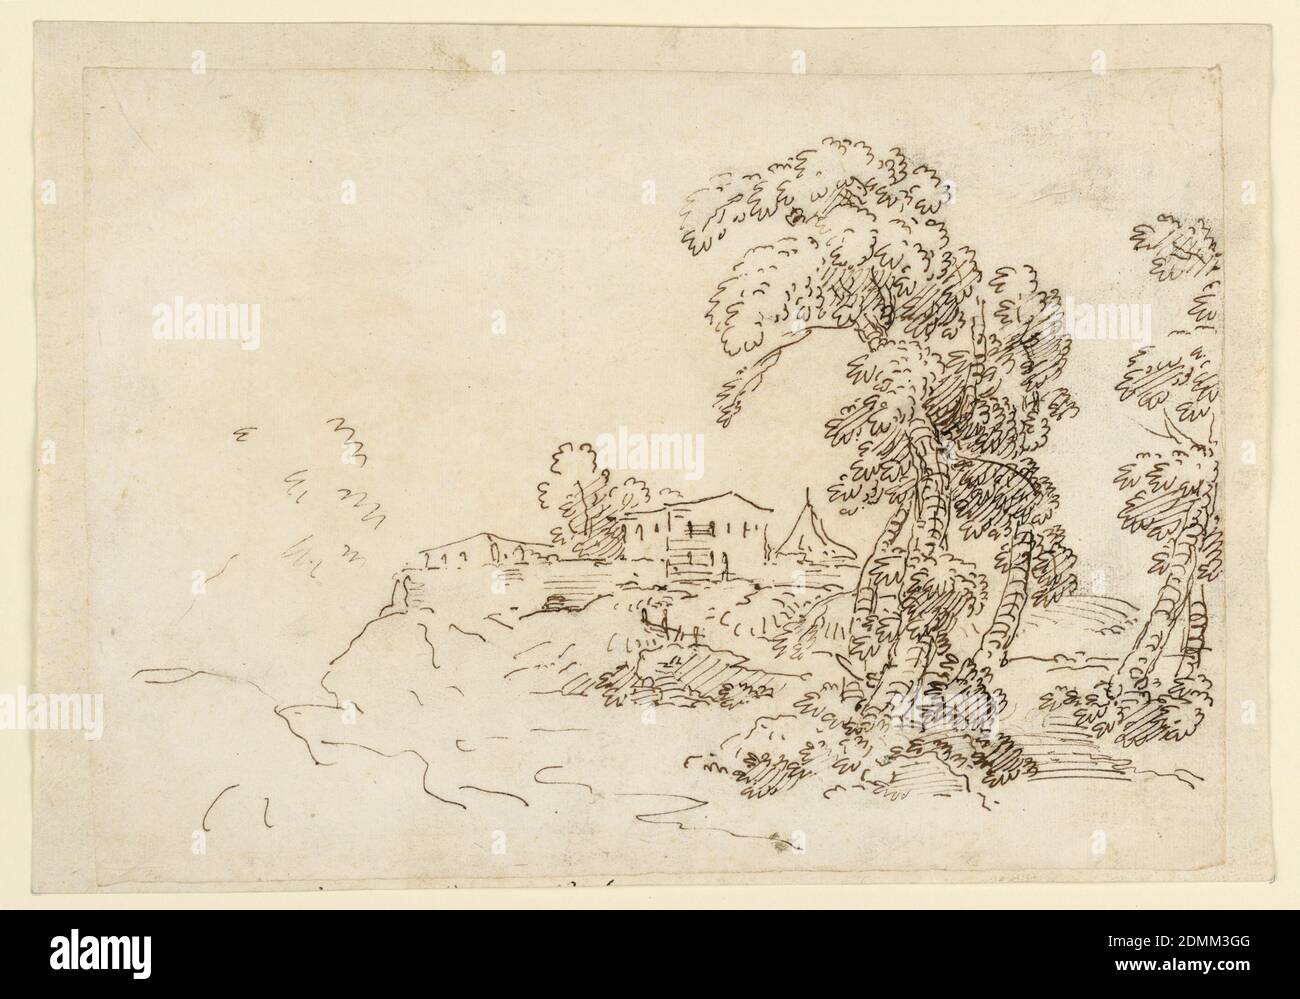 View of a Farm, Carlo Marchionni, Italian, 1702–1786, Pen and ink on paper, Group of trees at right, in the foreground. The farm in the middle ground., Italy, 1750–1770, landscapes, Drawing Stock Photo